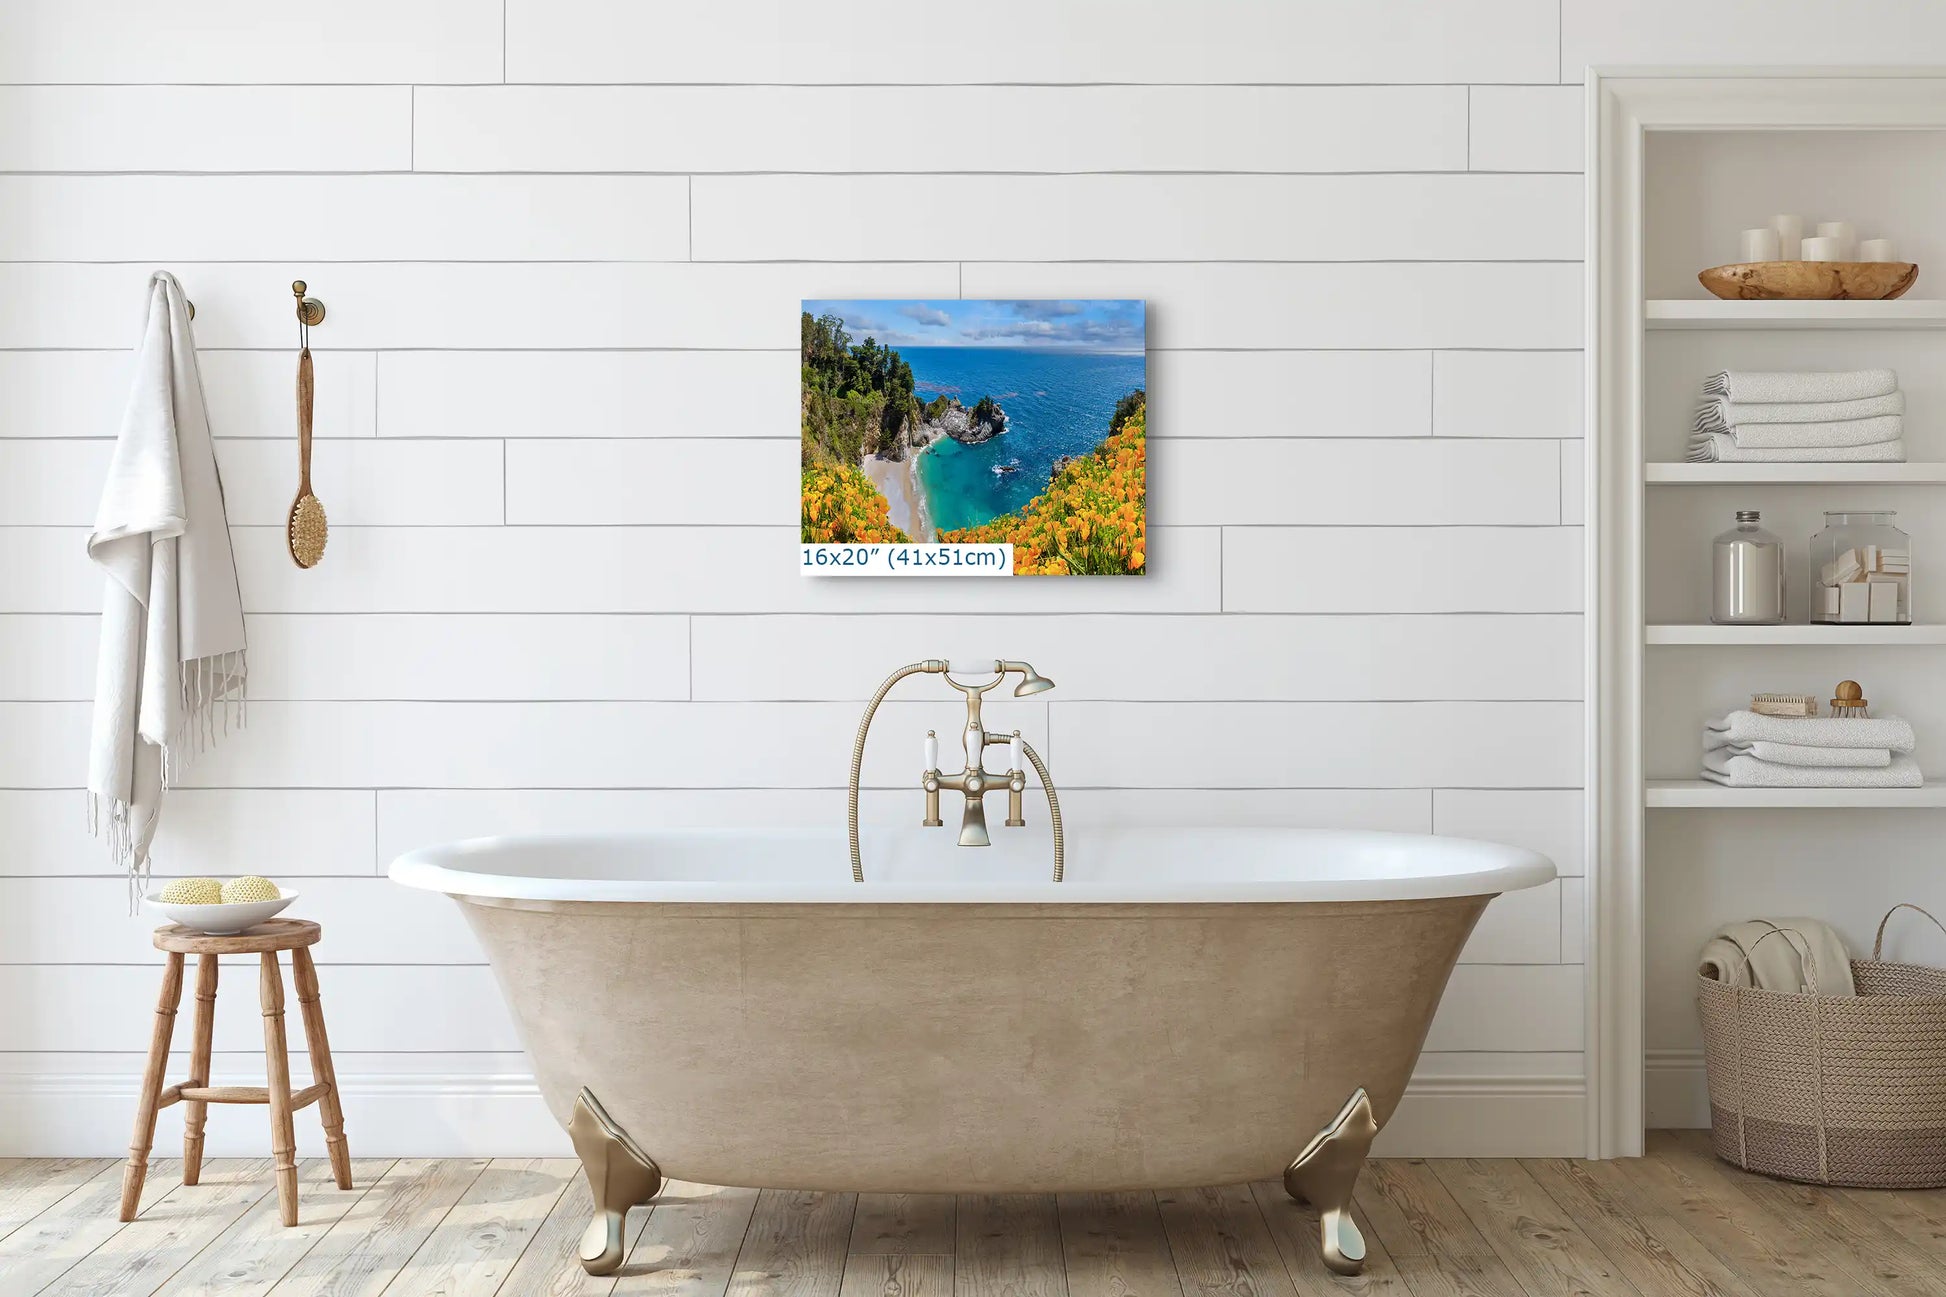 A 16x20 canvas wall art of McWay Falls at Big Sur placed above a bathtub, complementing the bathroom ambiance.